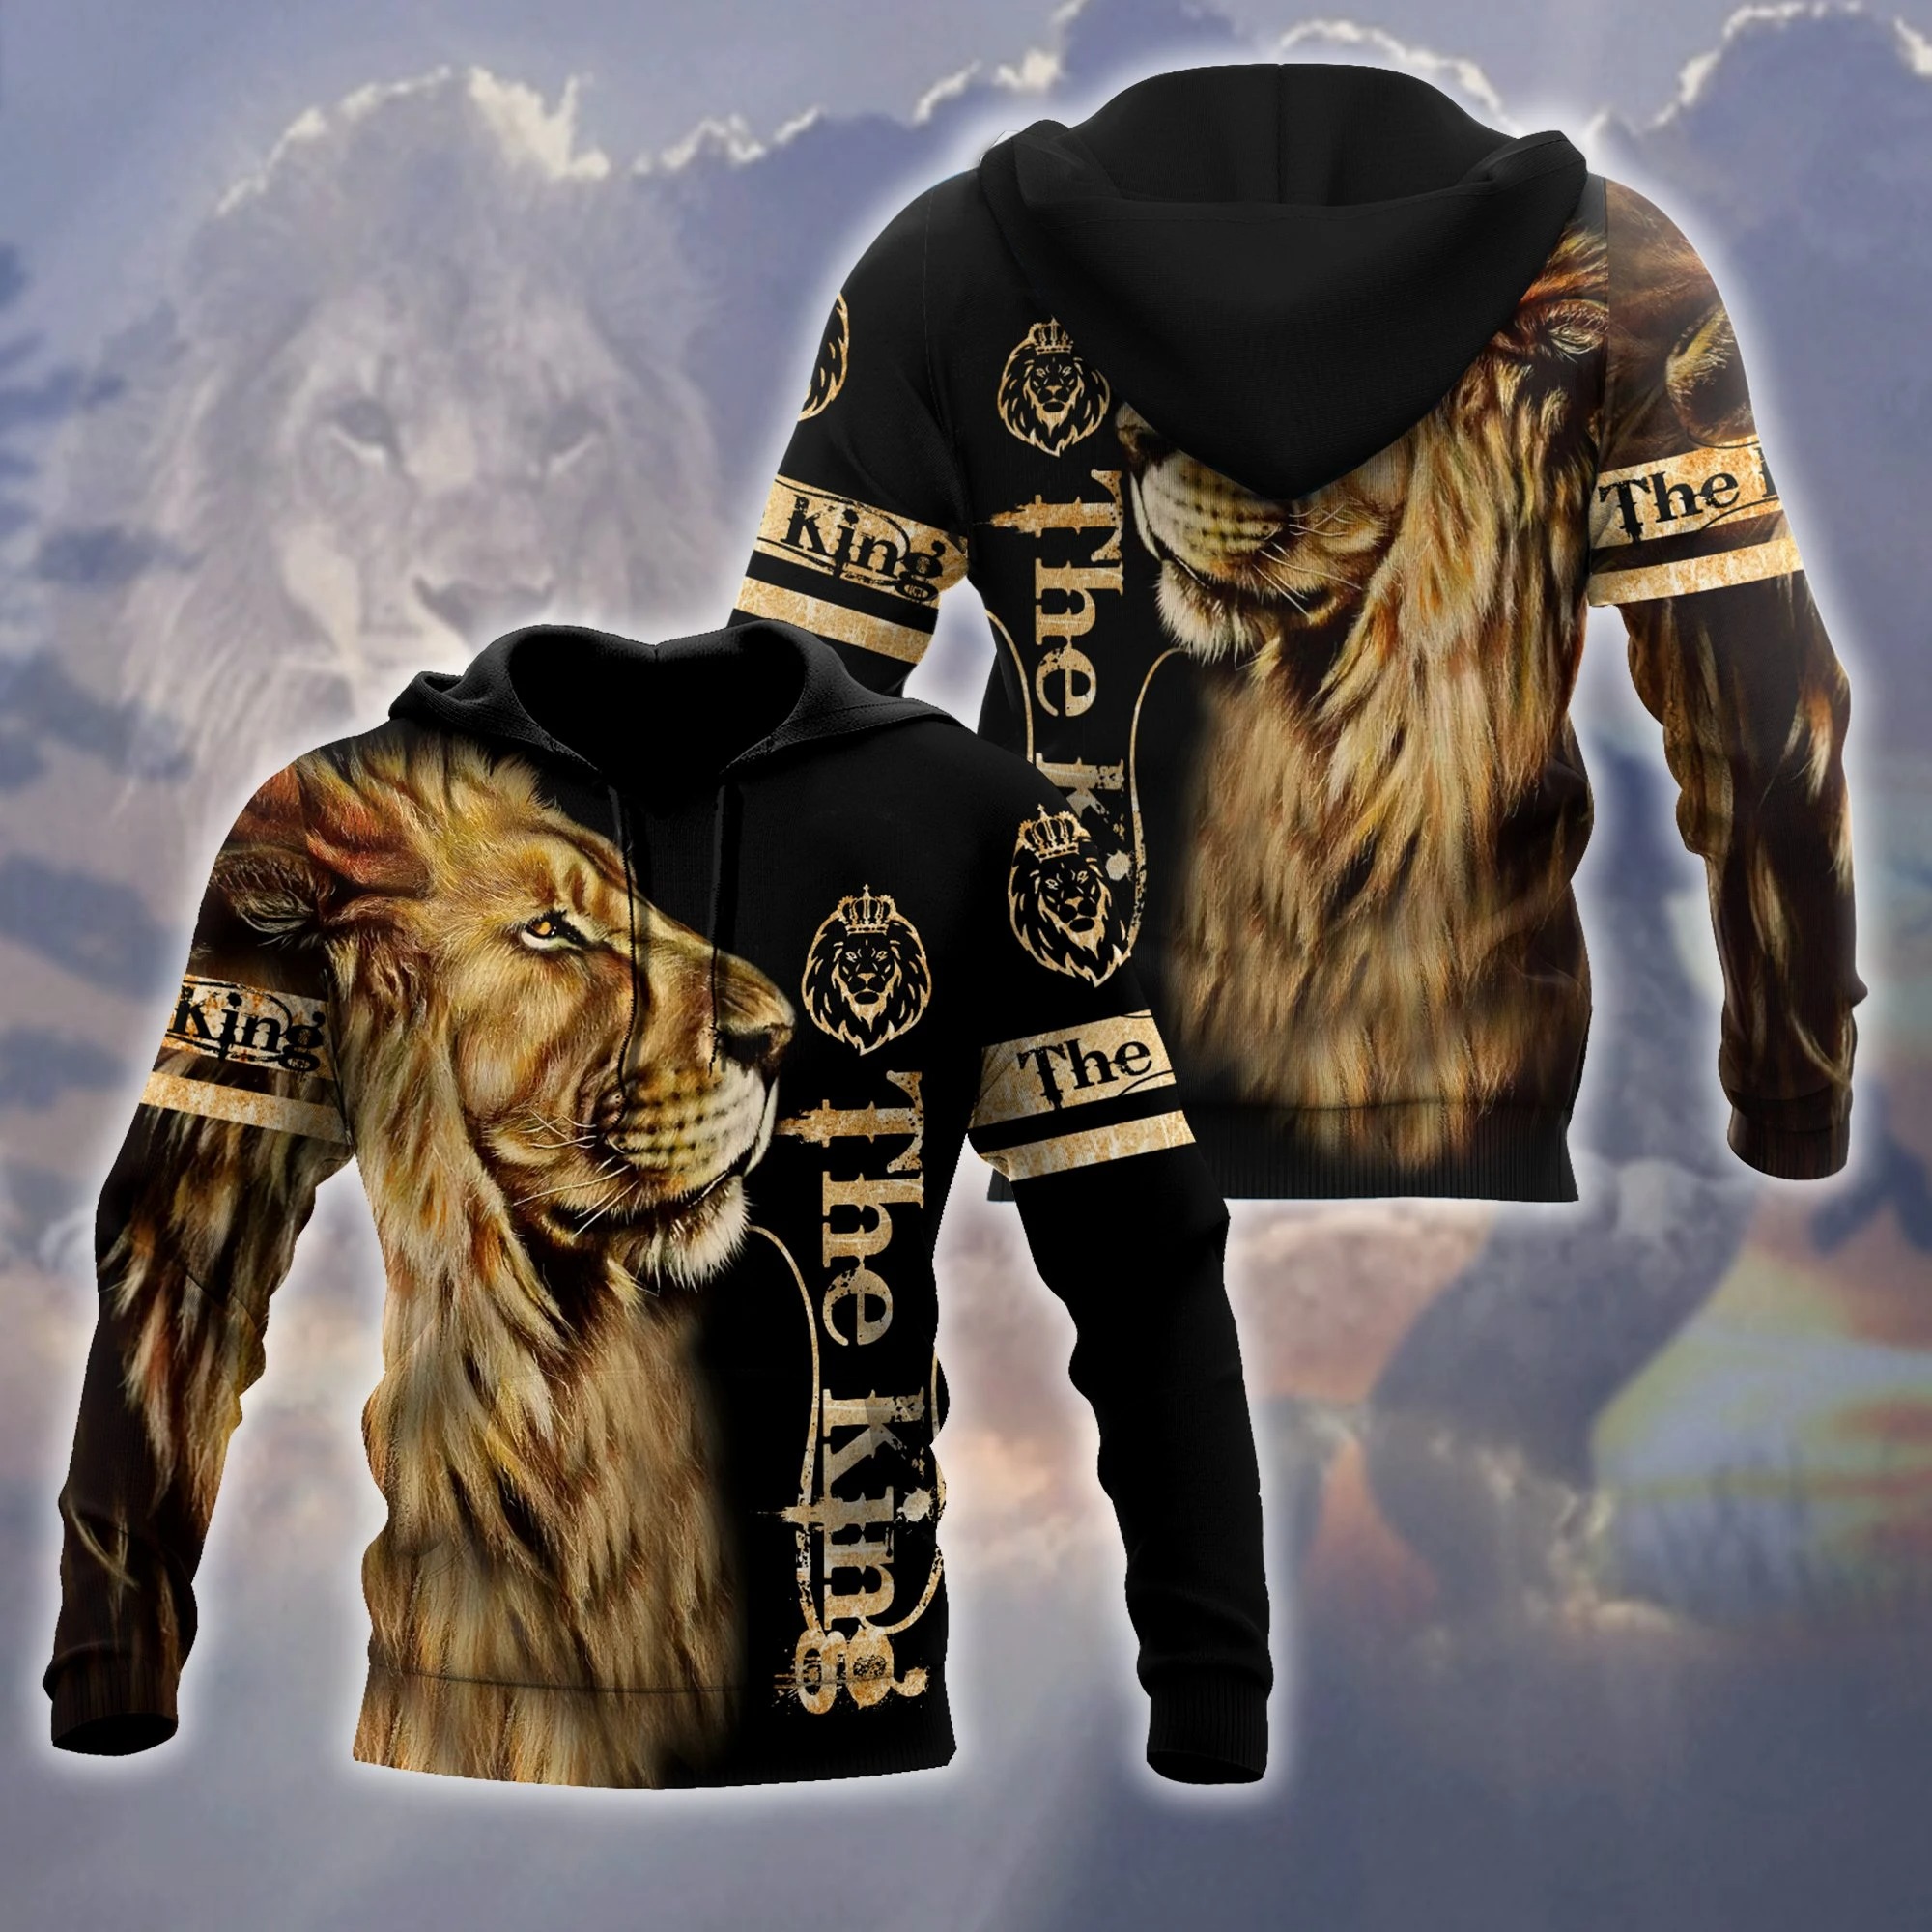 King lion 3d all over printed unisex hoodie and shirt – Hothot 041220